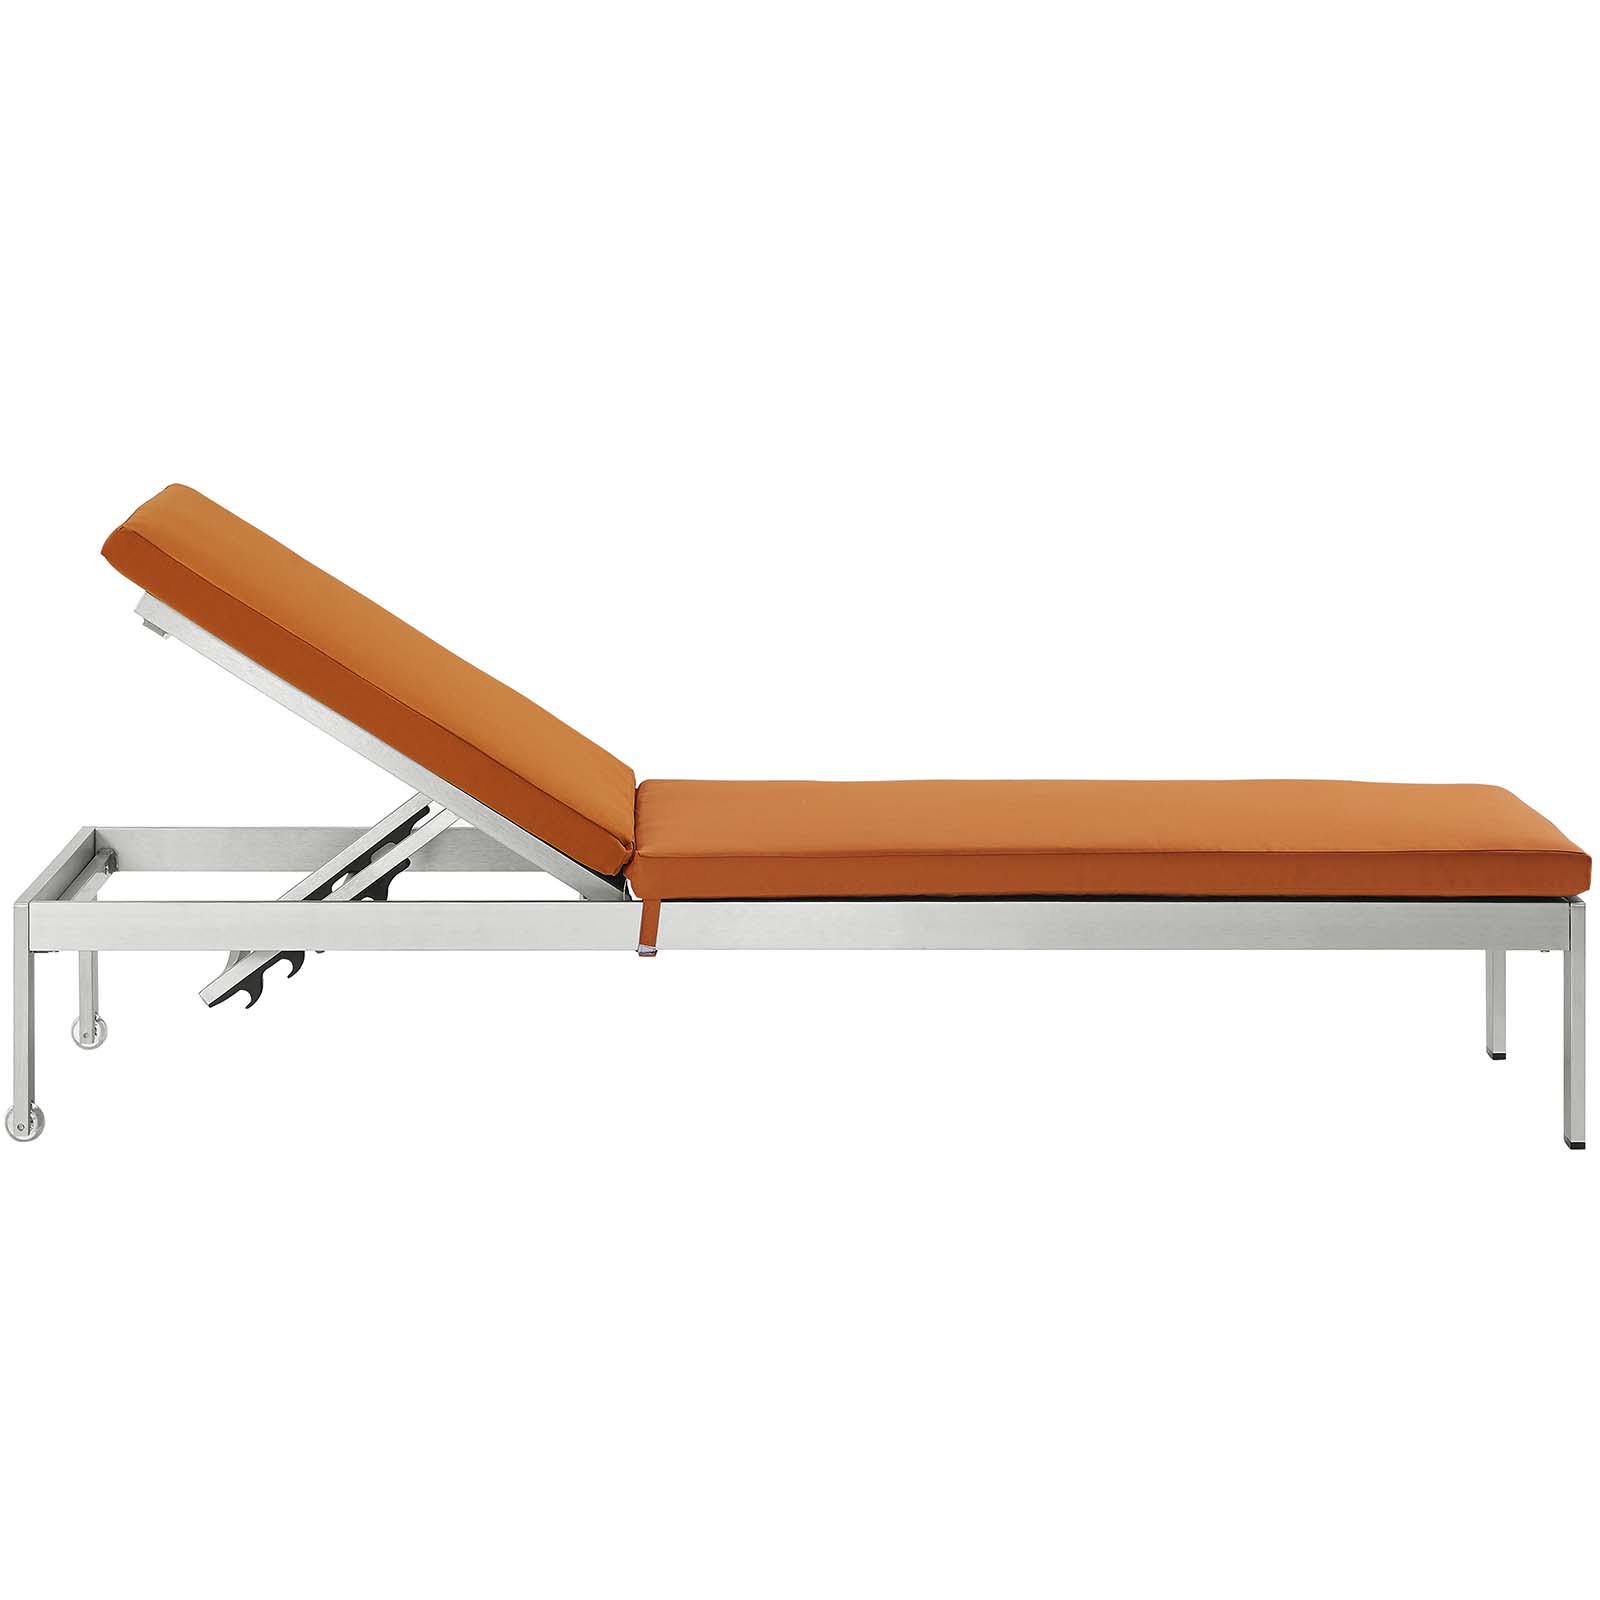 Modern Contemporary Urban Design Outdoor Patio Balcony Chaise Lounge Chair ( Set of 6), Orange, Aluminum - image 5 of 6